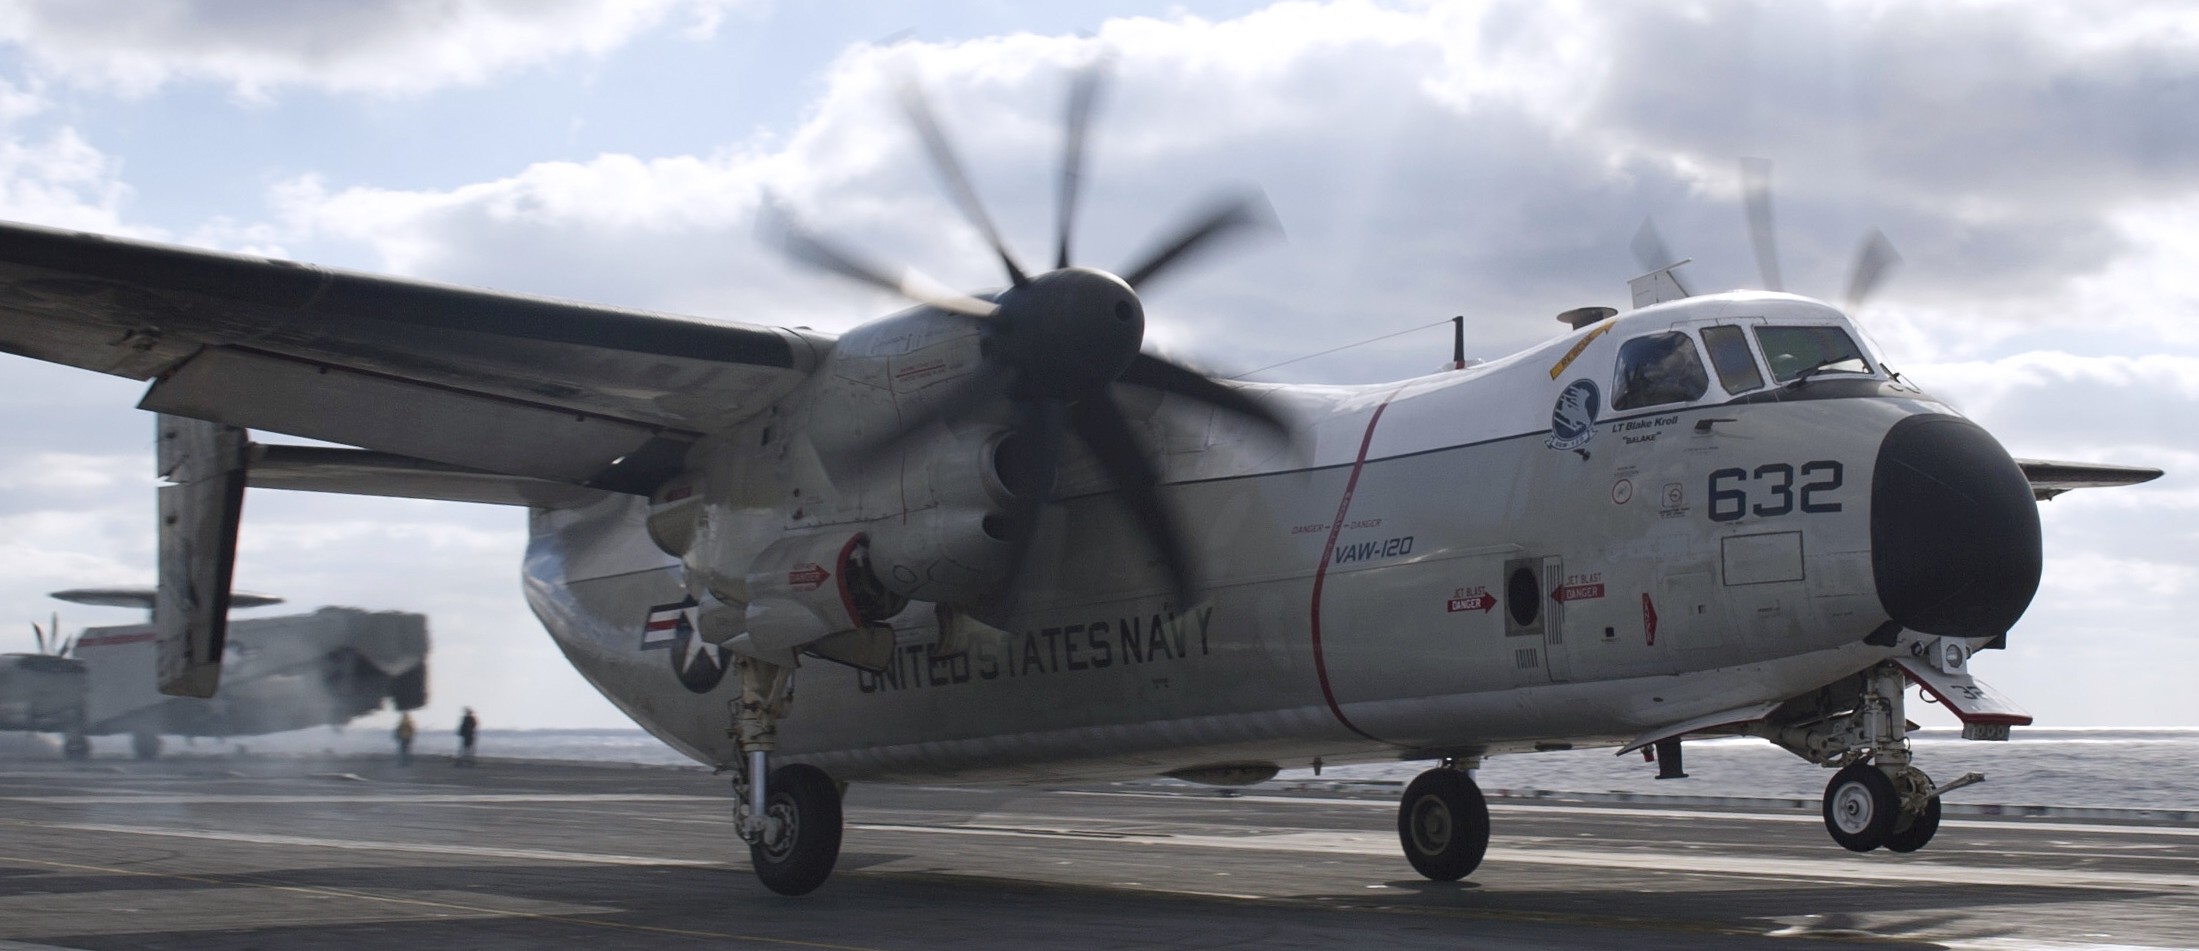 vaw-120 greyhawks carrier airborne early warning squadron c-2a greyhound replacement uss harry s. truman cvn-75 70